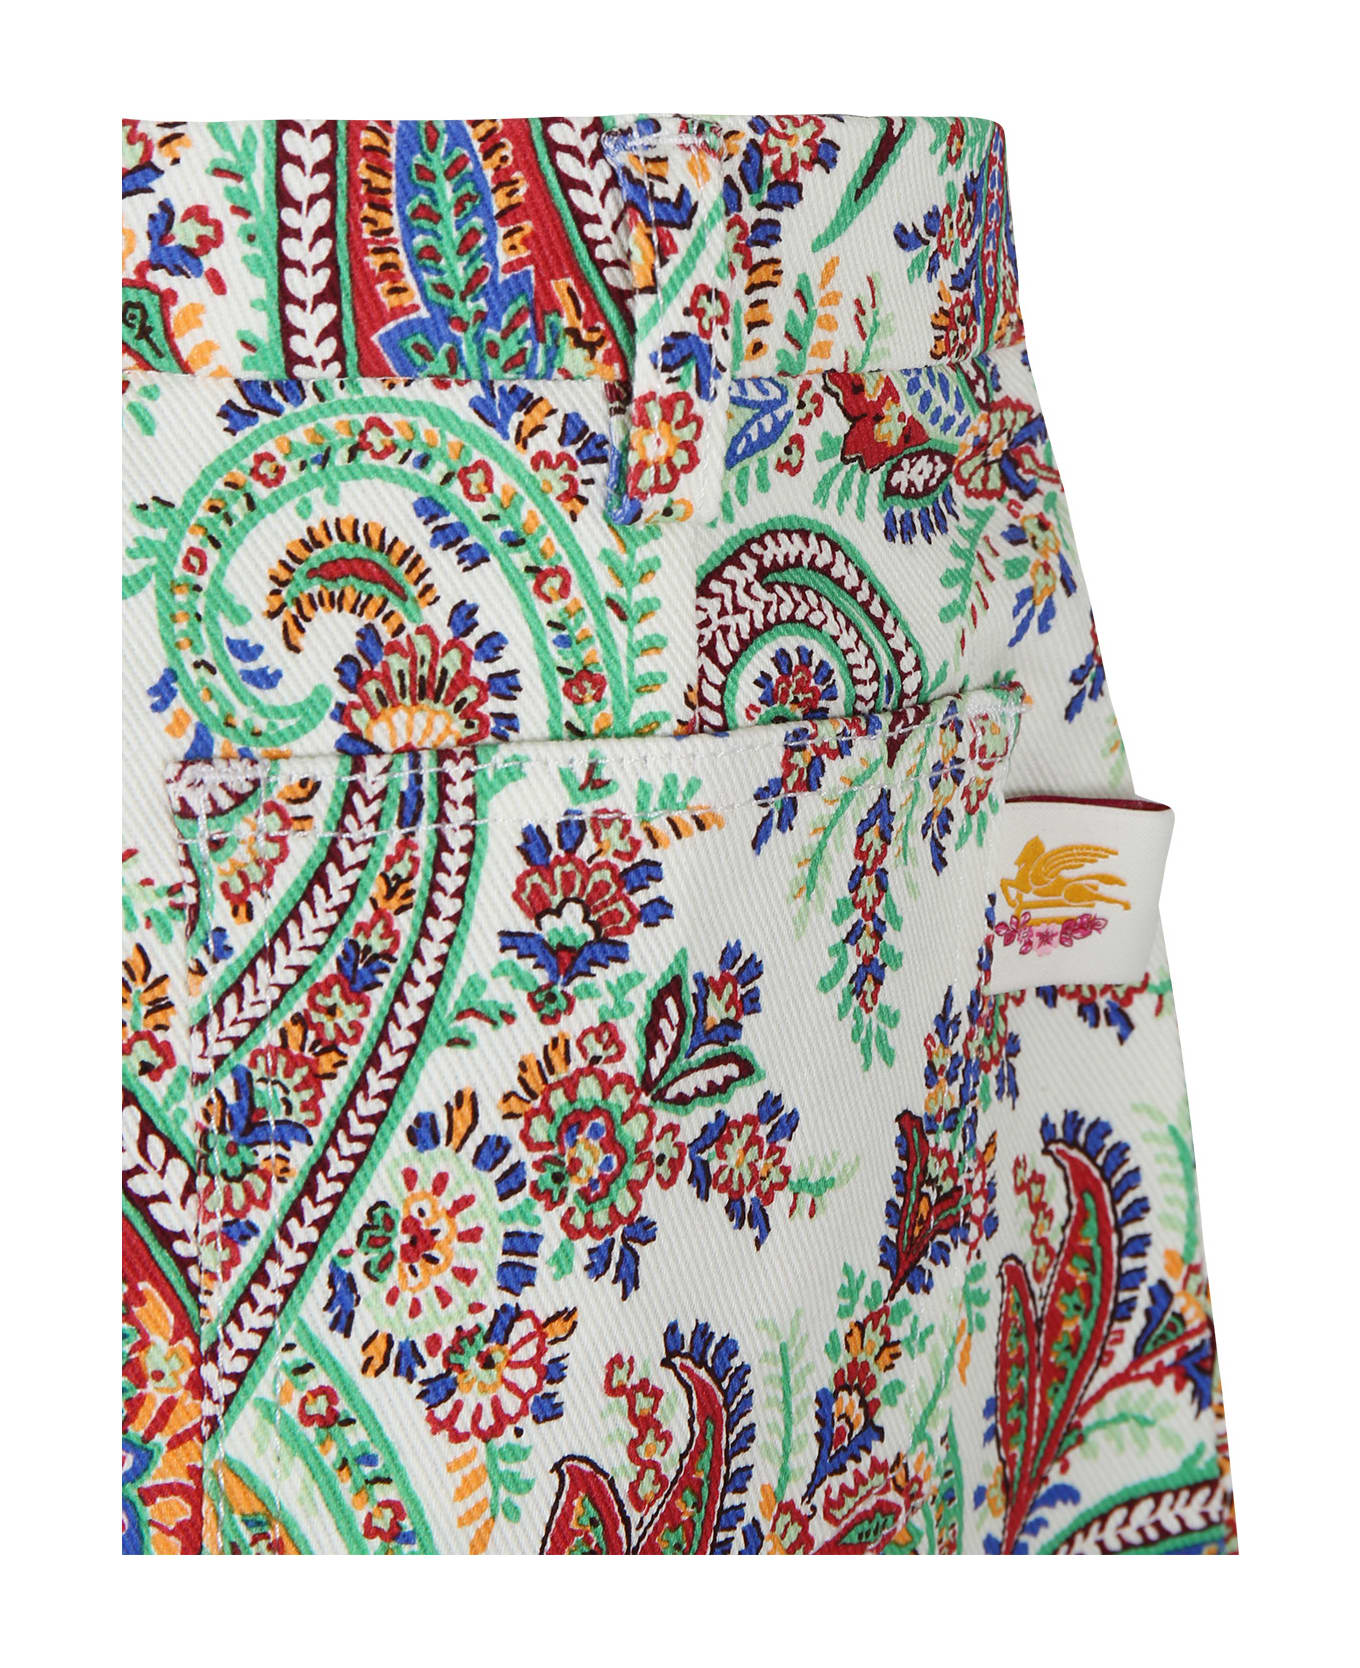 Etro Ivory Shorts For Girl With Paisley Pattern - ivory/colourful